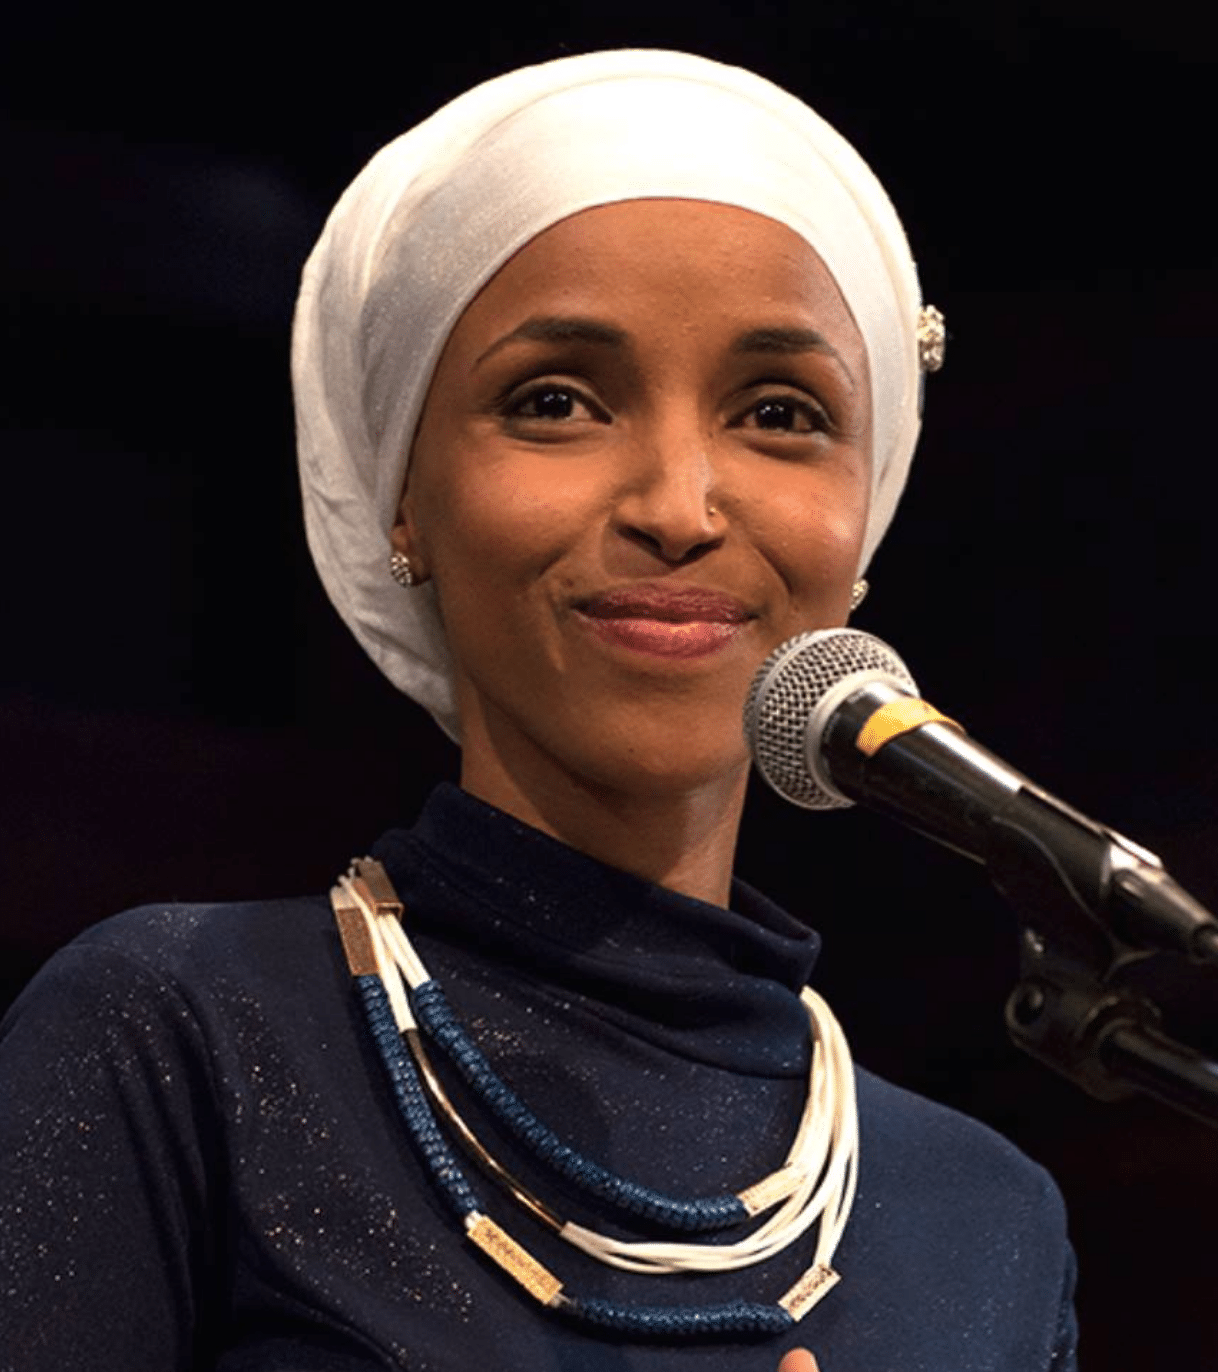 Ilhan Omar Is Hoping To Become The First Somali-American Member Of Congress
